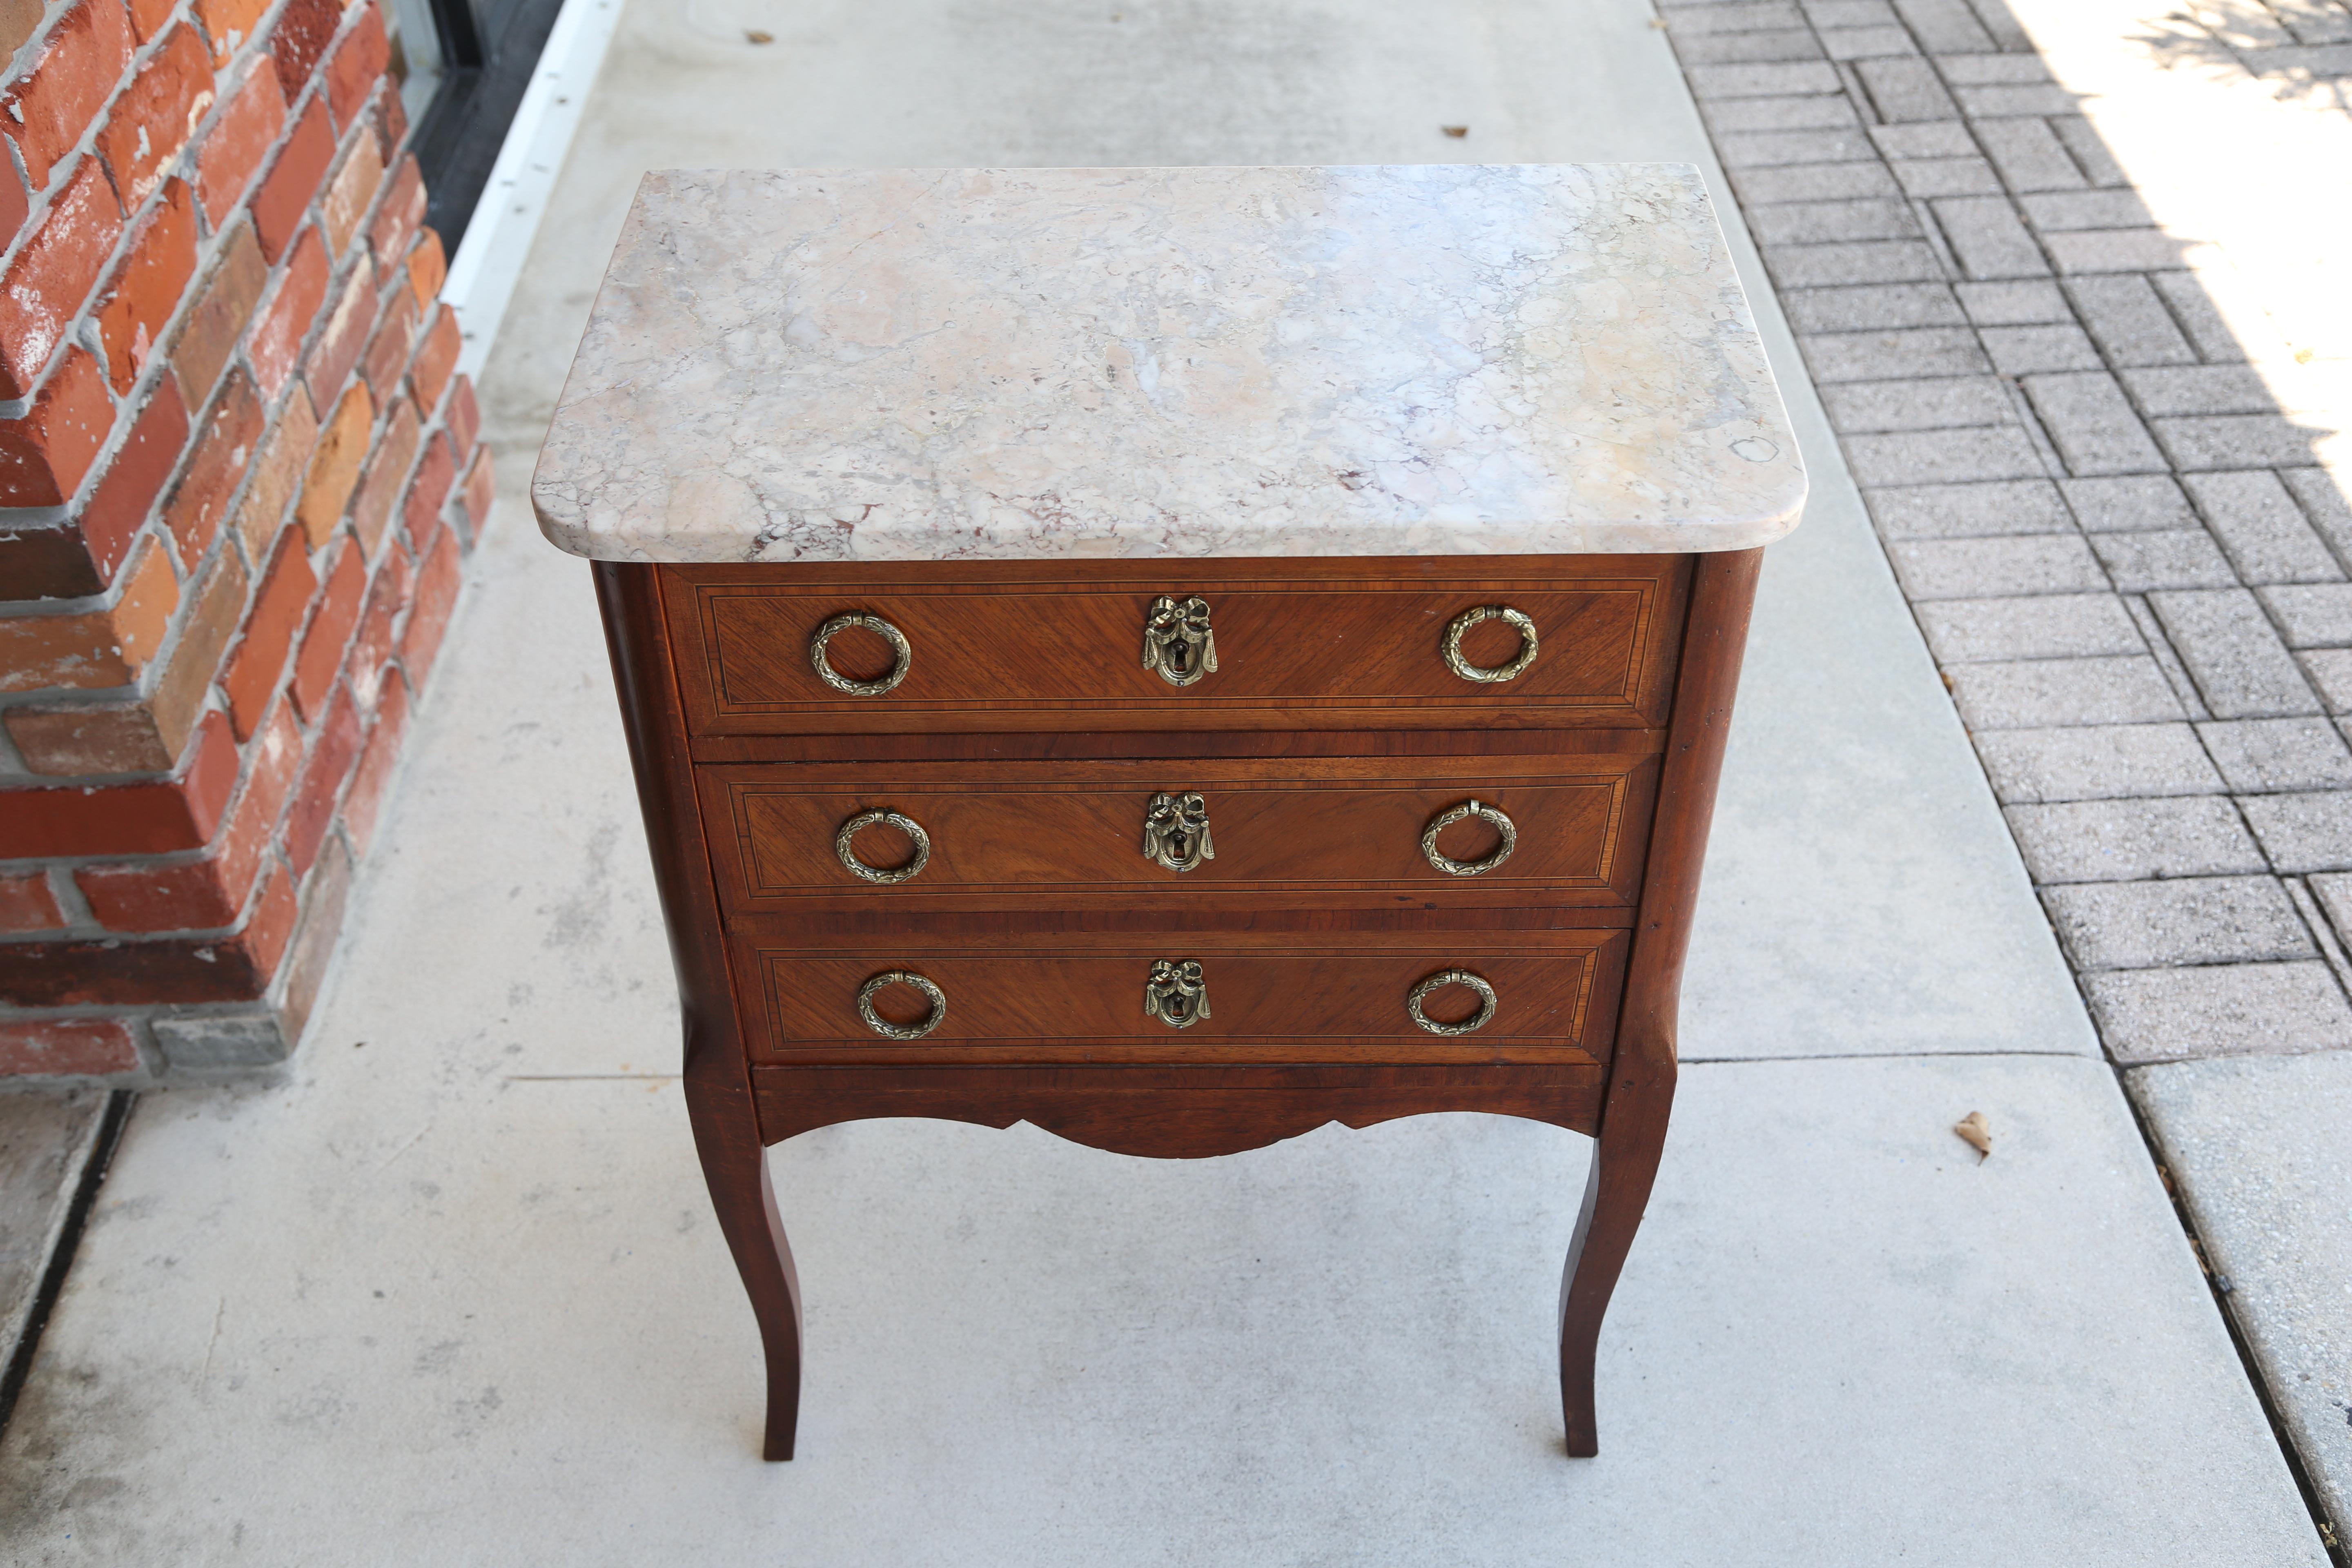 Three-drawer petite French commode with marble top.